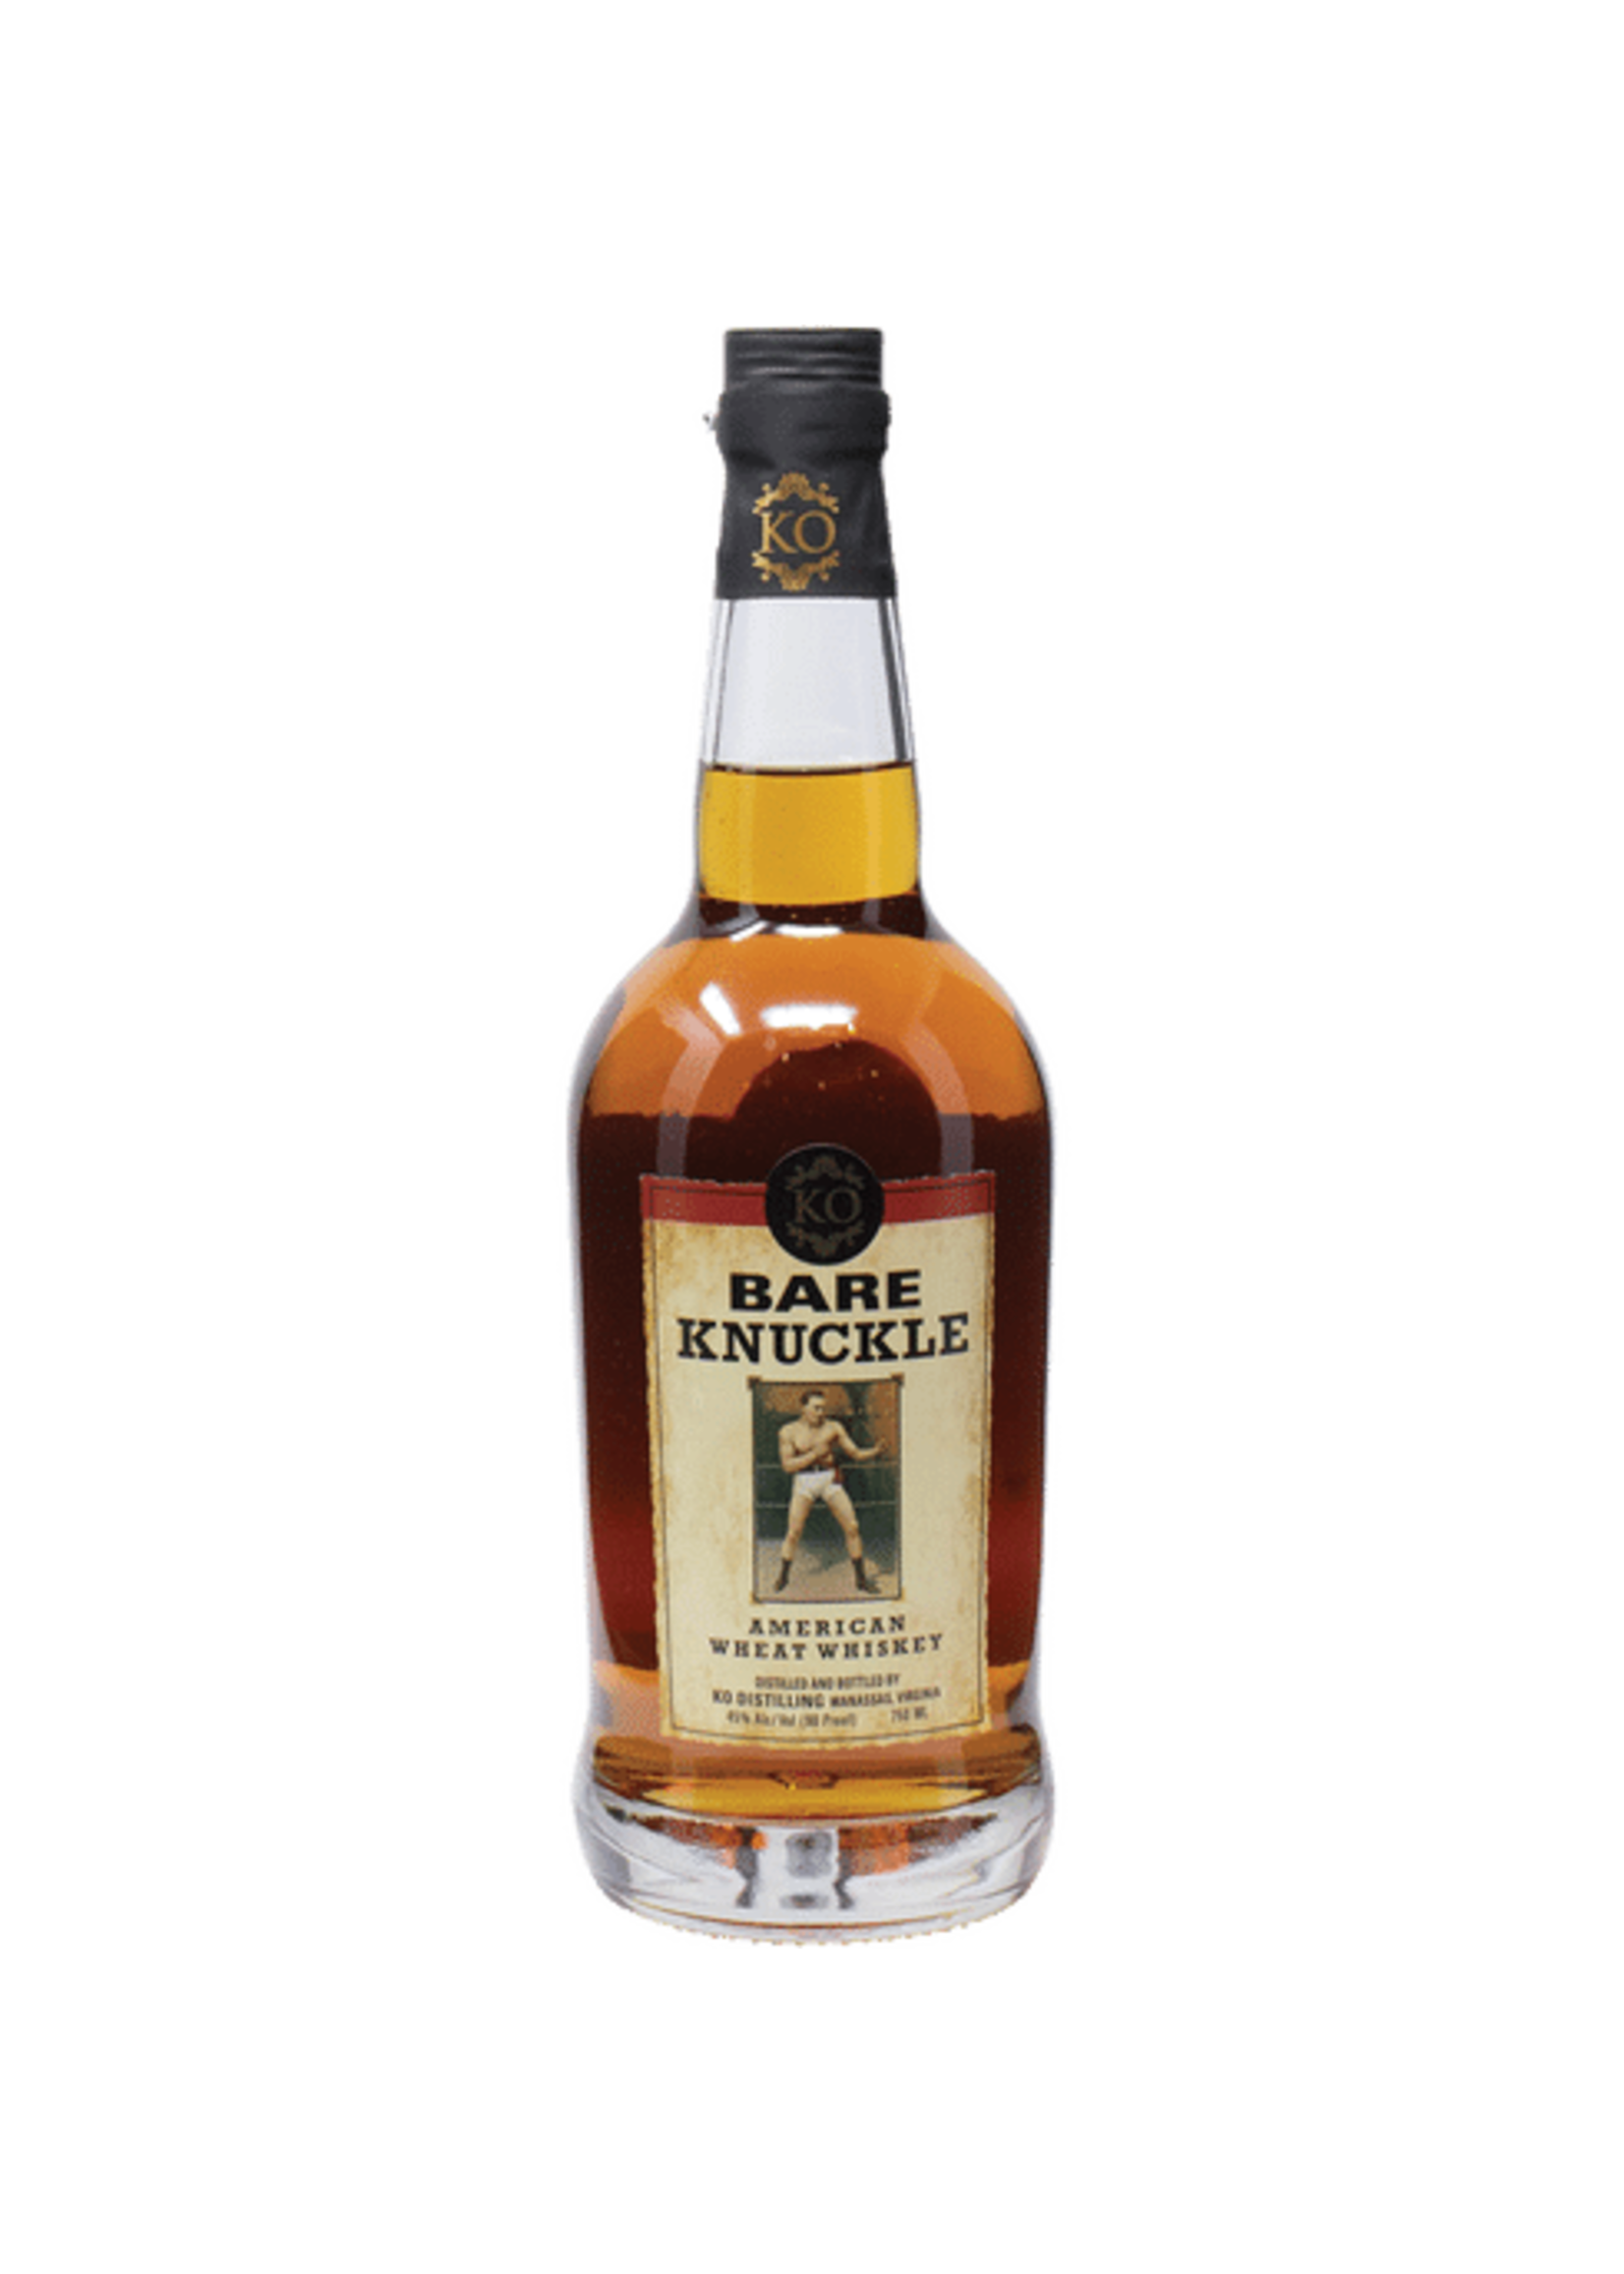 Bare Knuckle Bare Knuckle Straight Wheat Whiskey